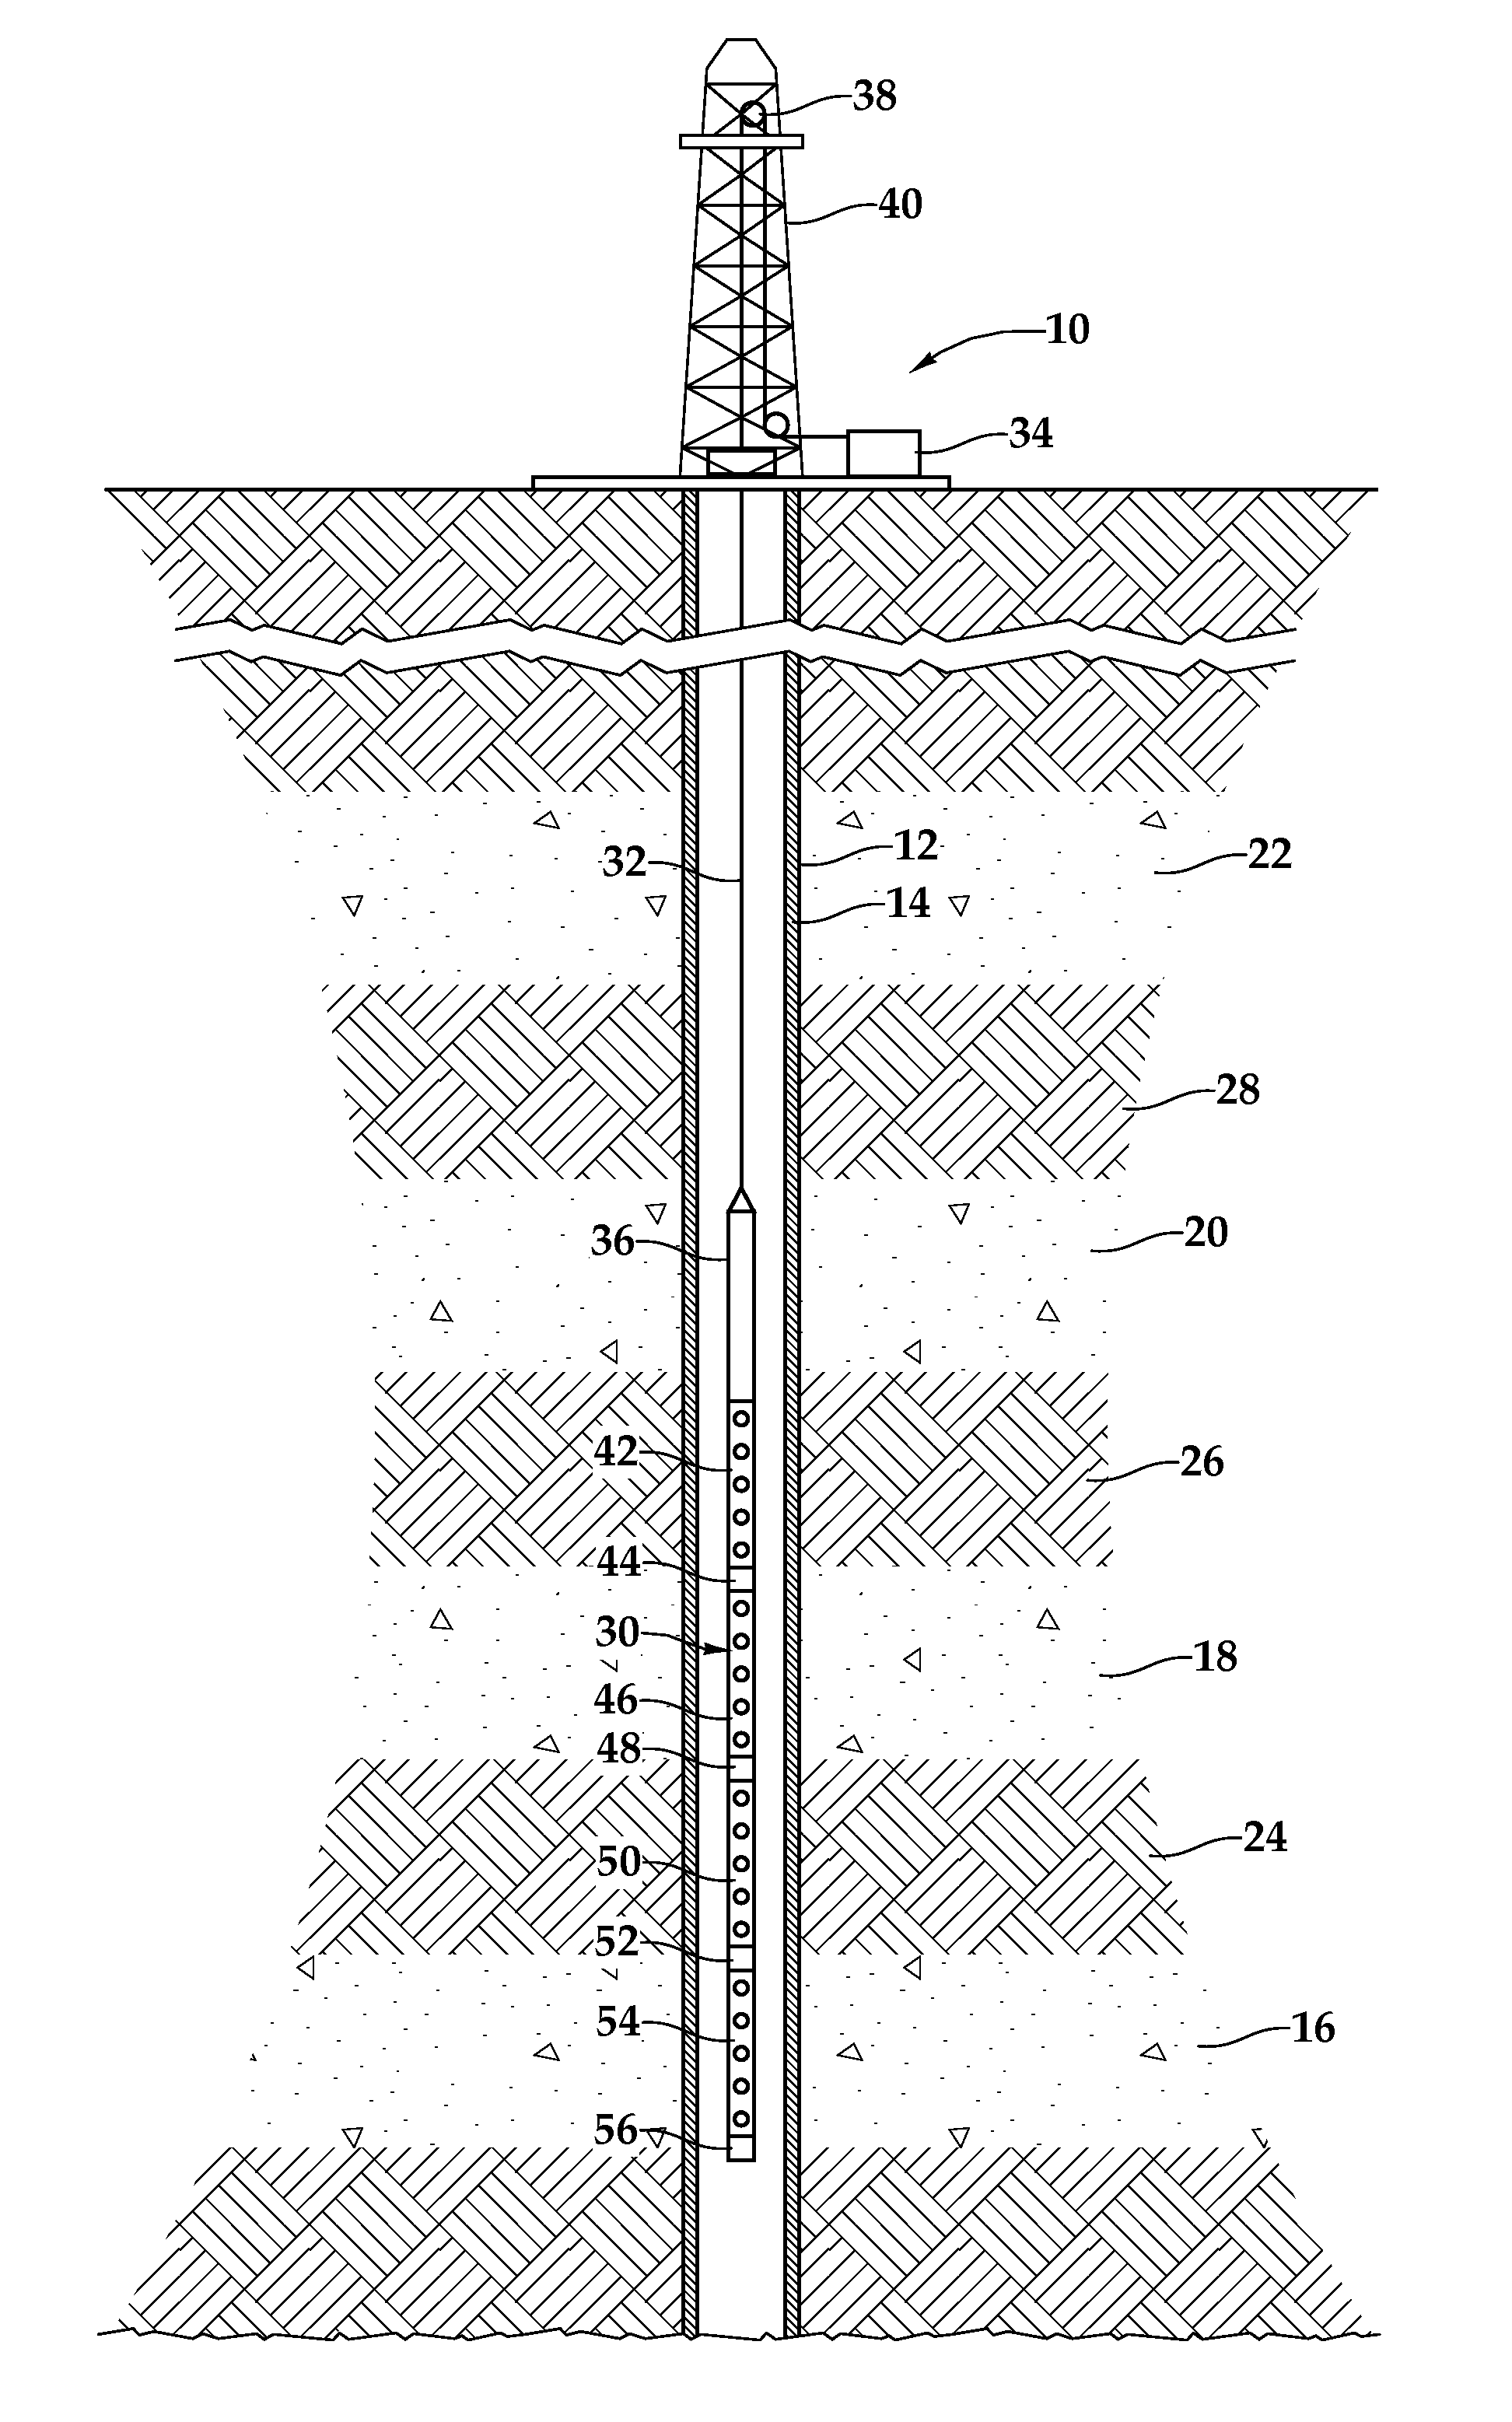 Method for selective activation of downhole devices in a tool string